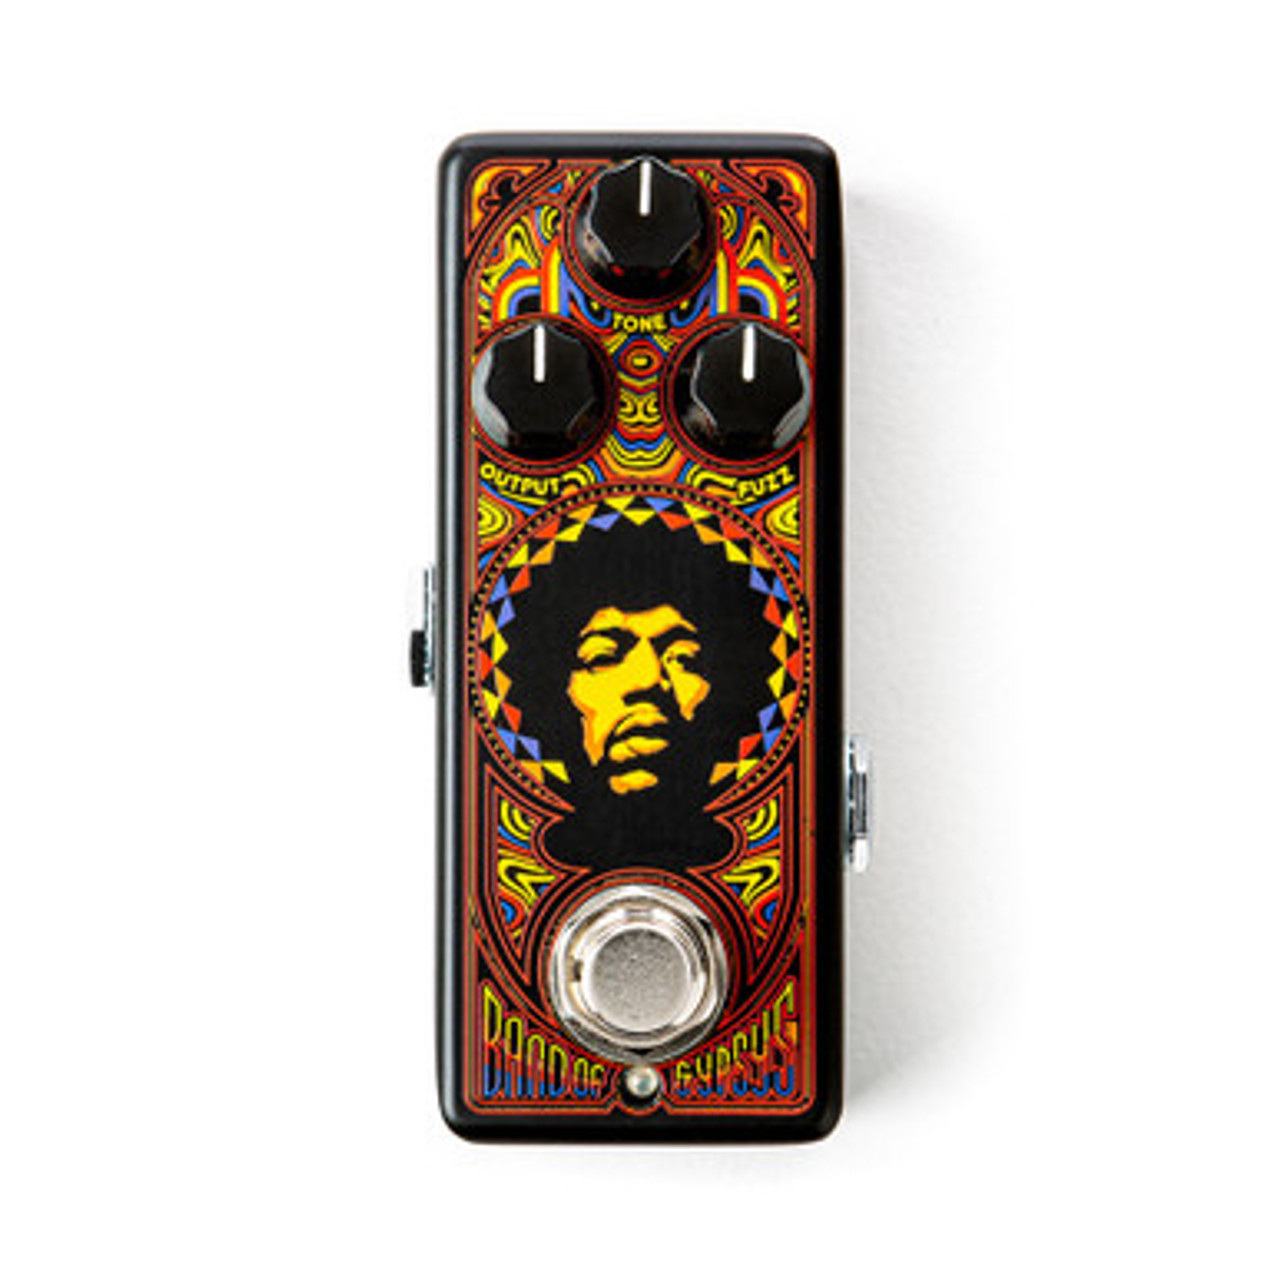 Jimi Hendrix JHW4 69 Psych Series Band of Gypsys Fuzz Pedal